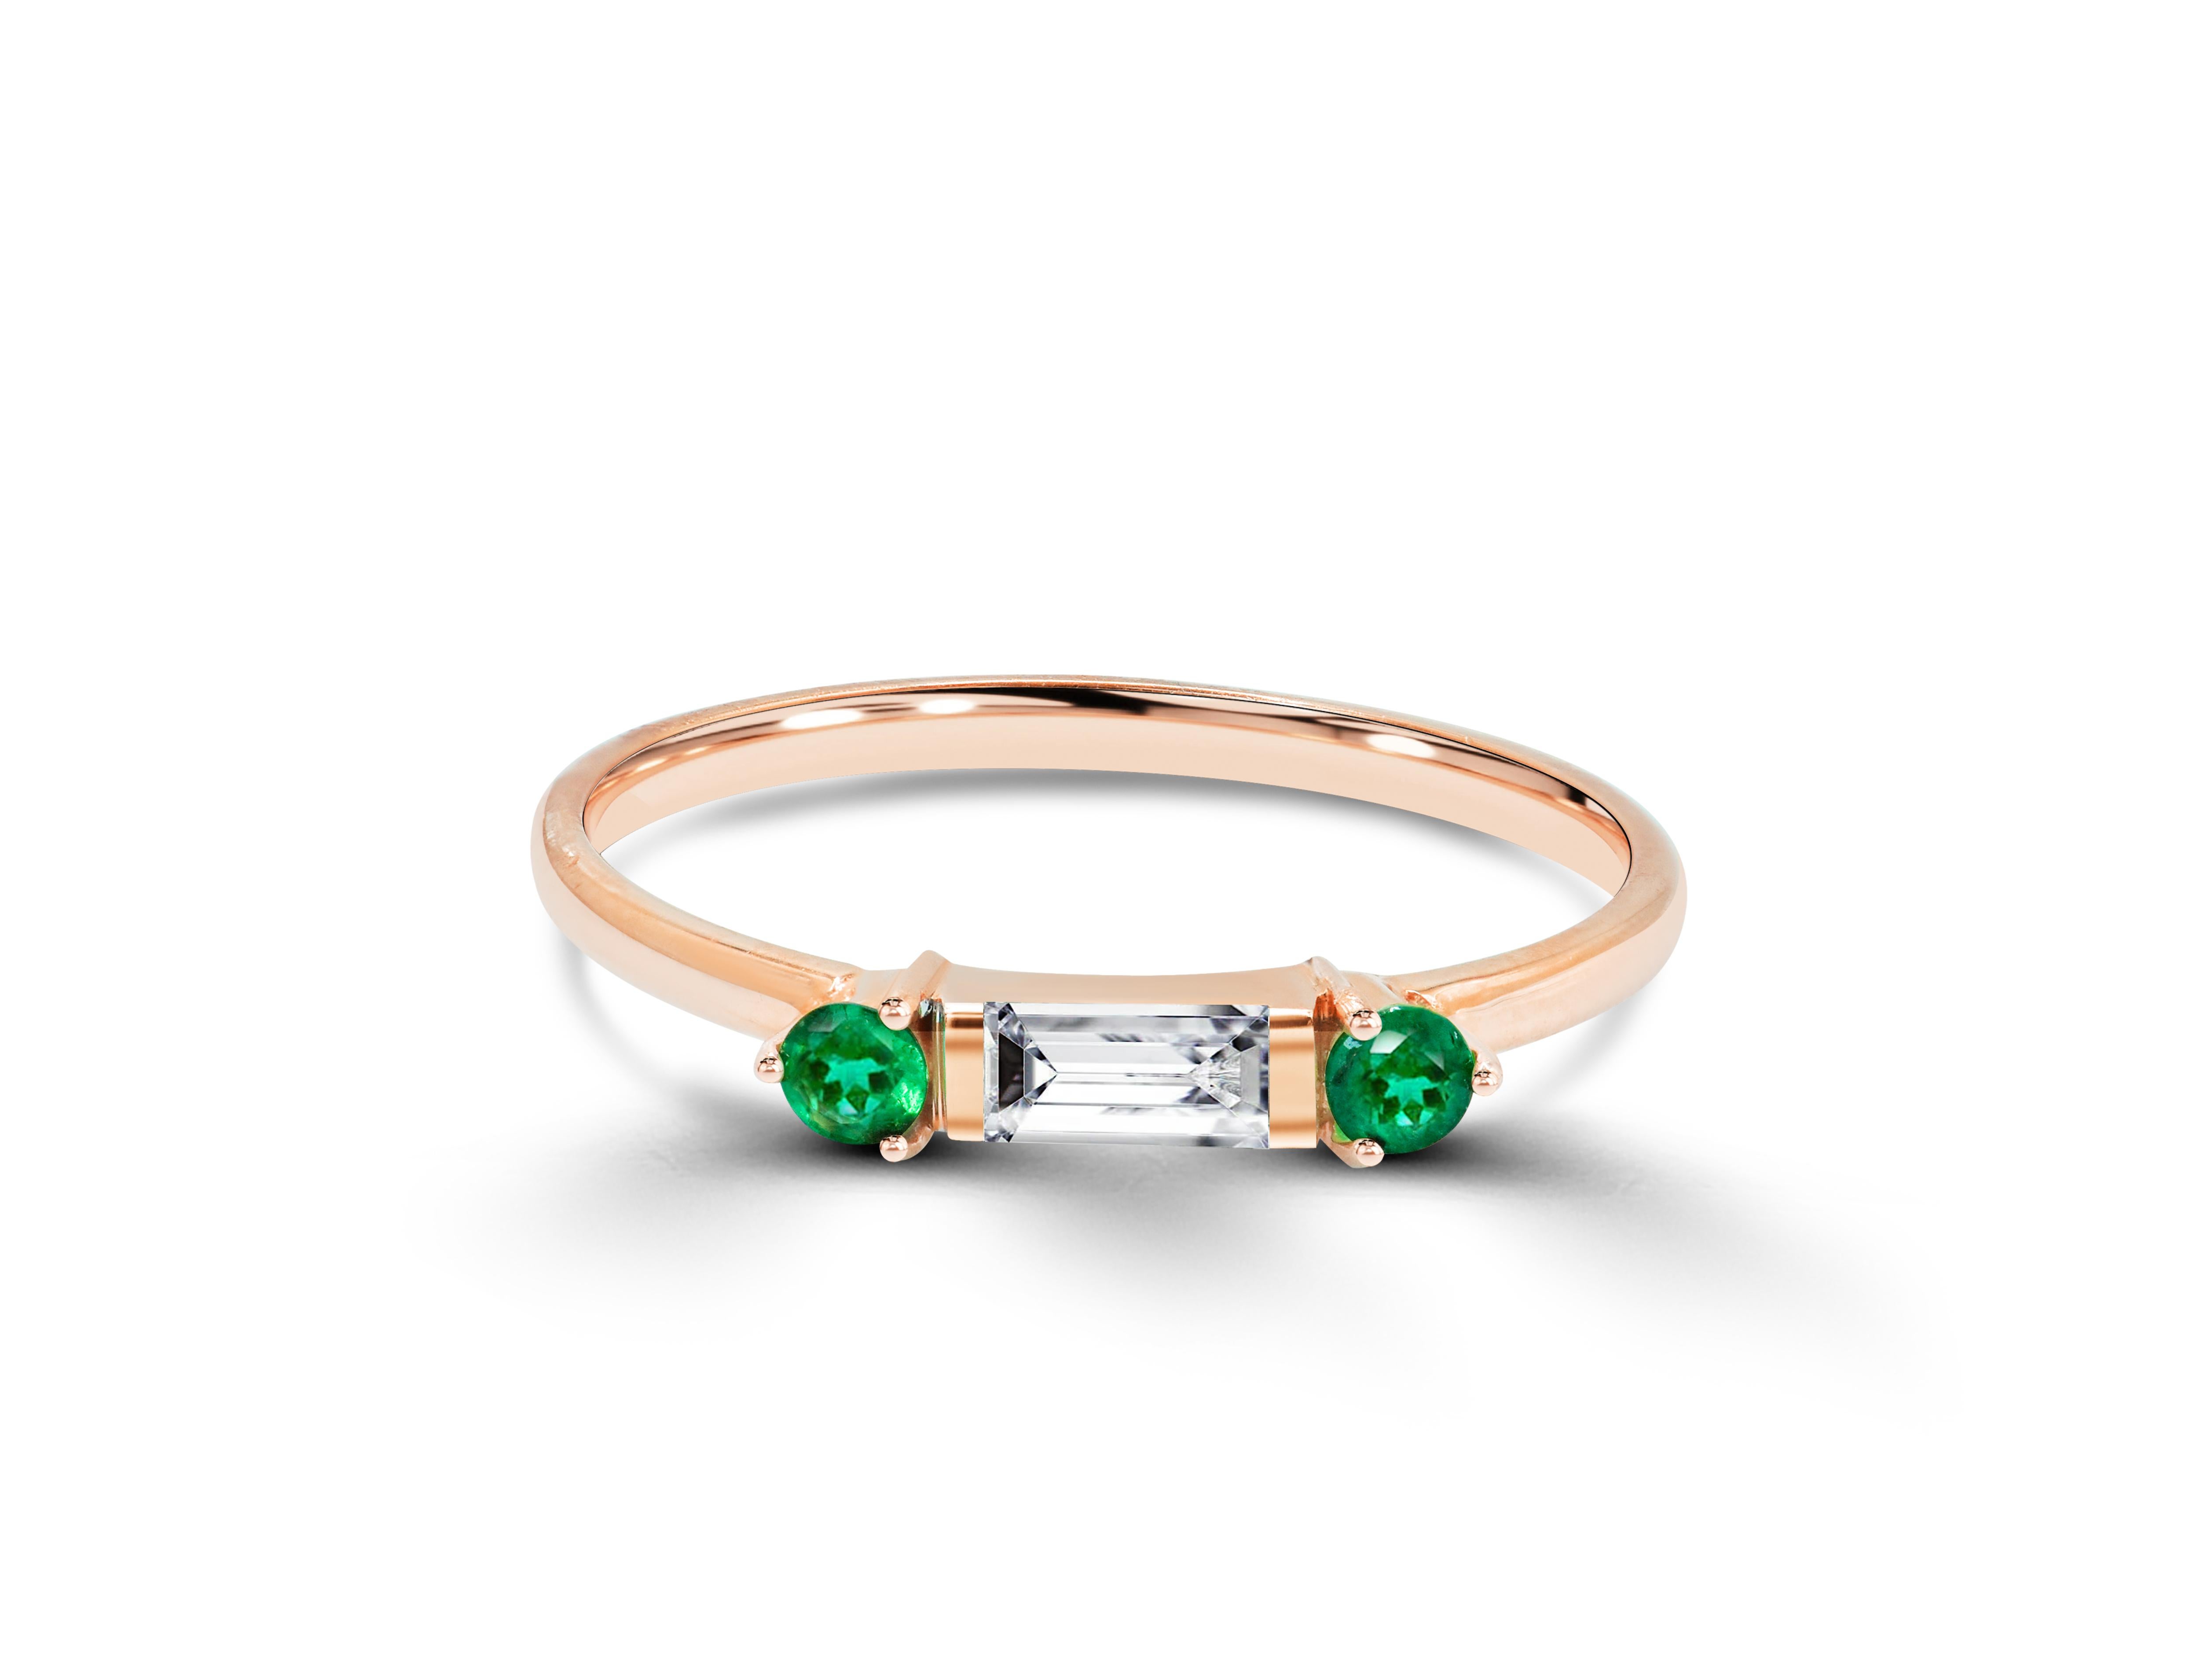 For Sale:  18k Gold Dainty Baguette Diamond Ring with Emerald Minimal Ring 2